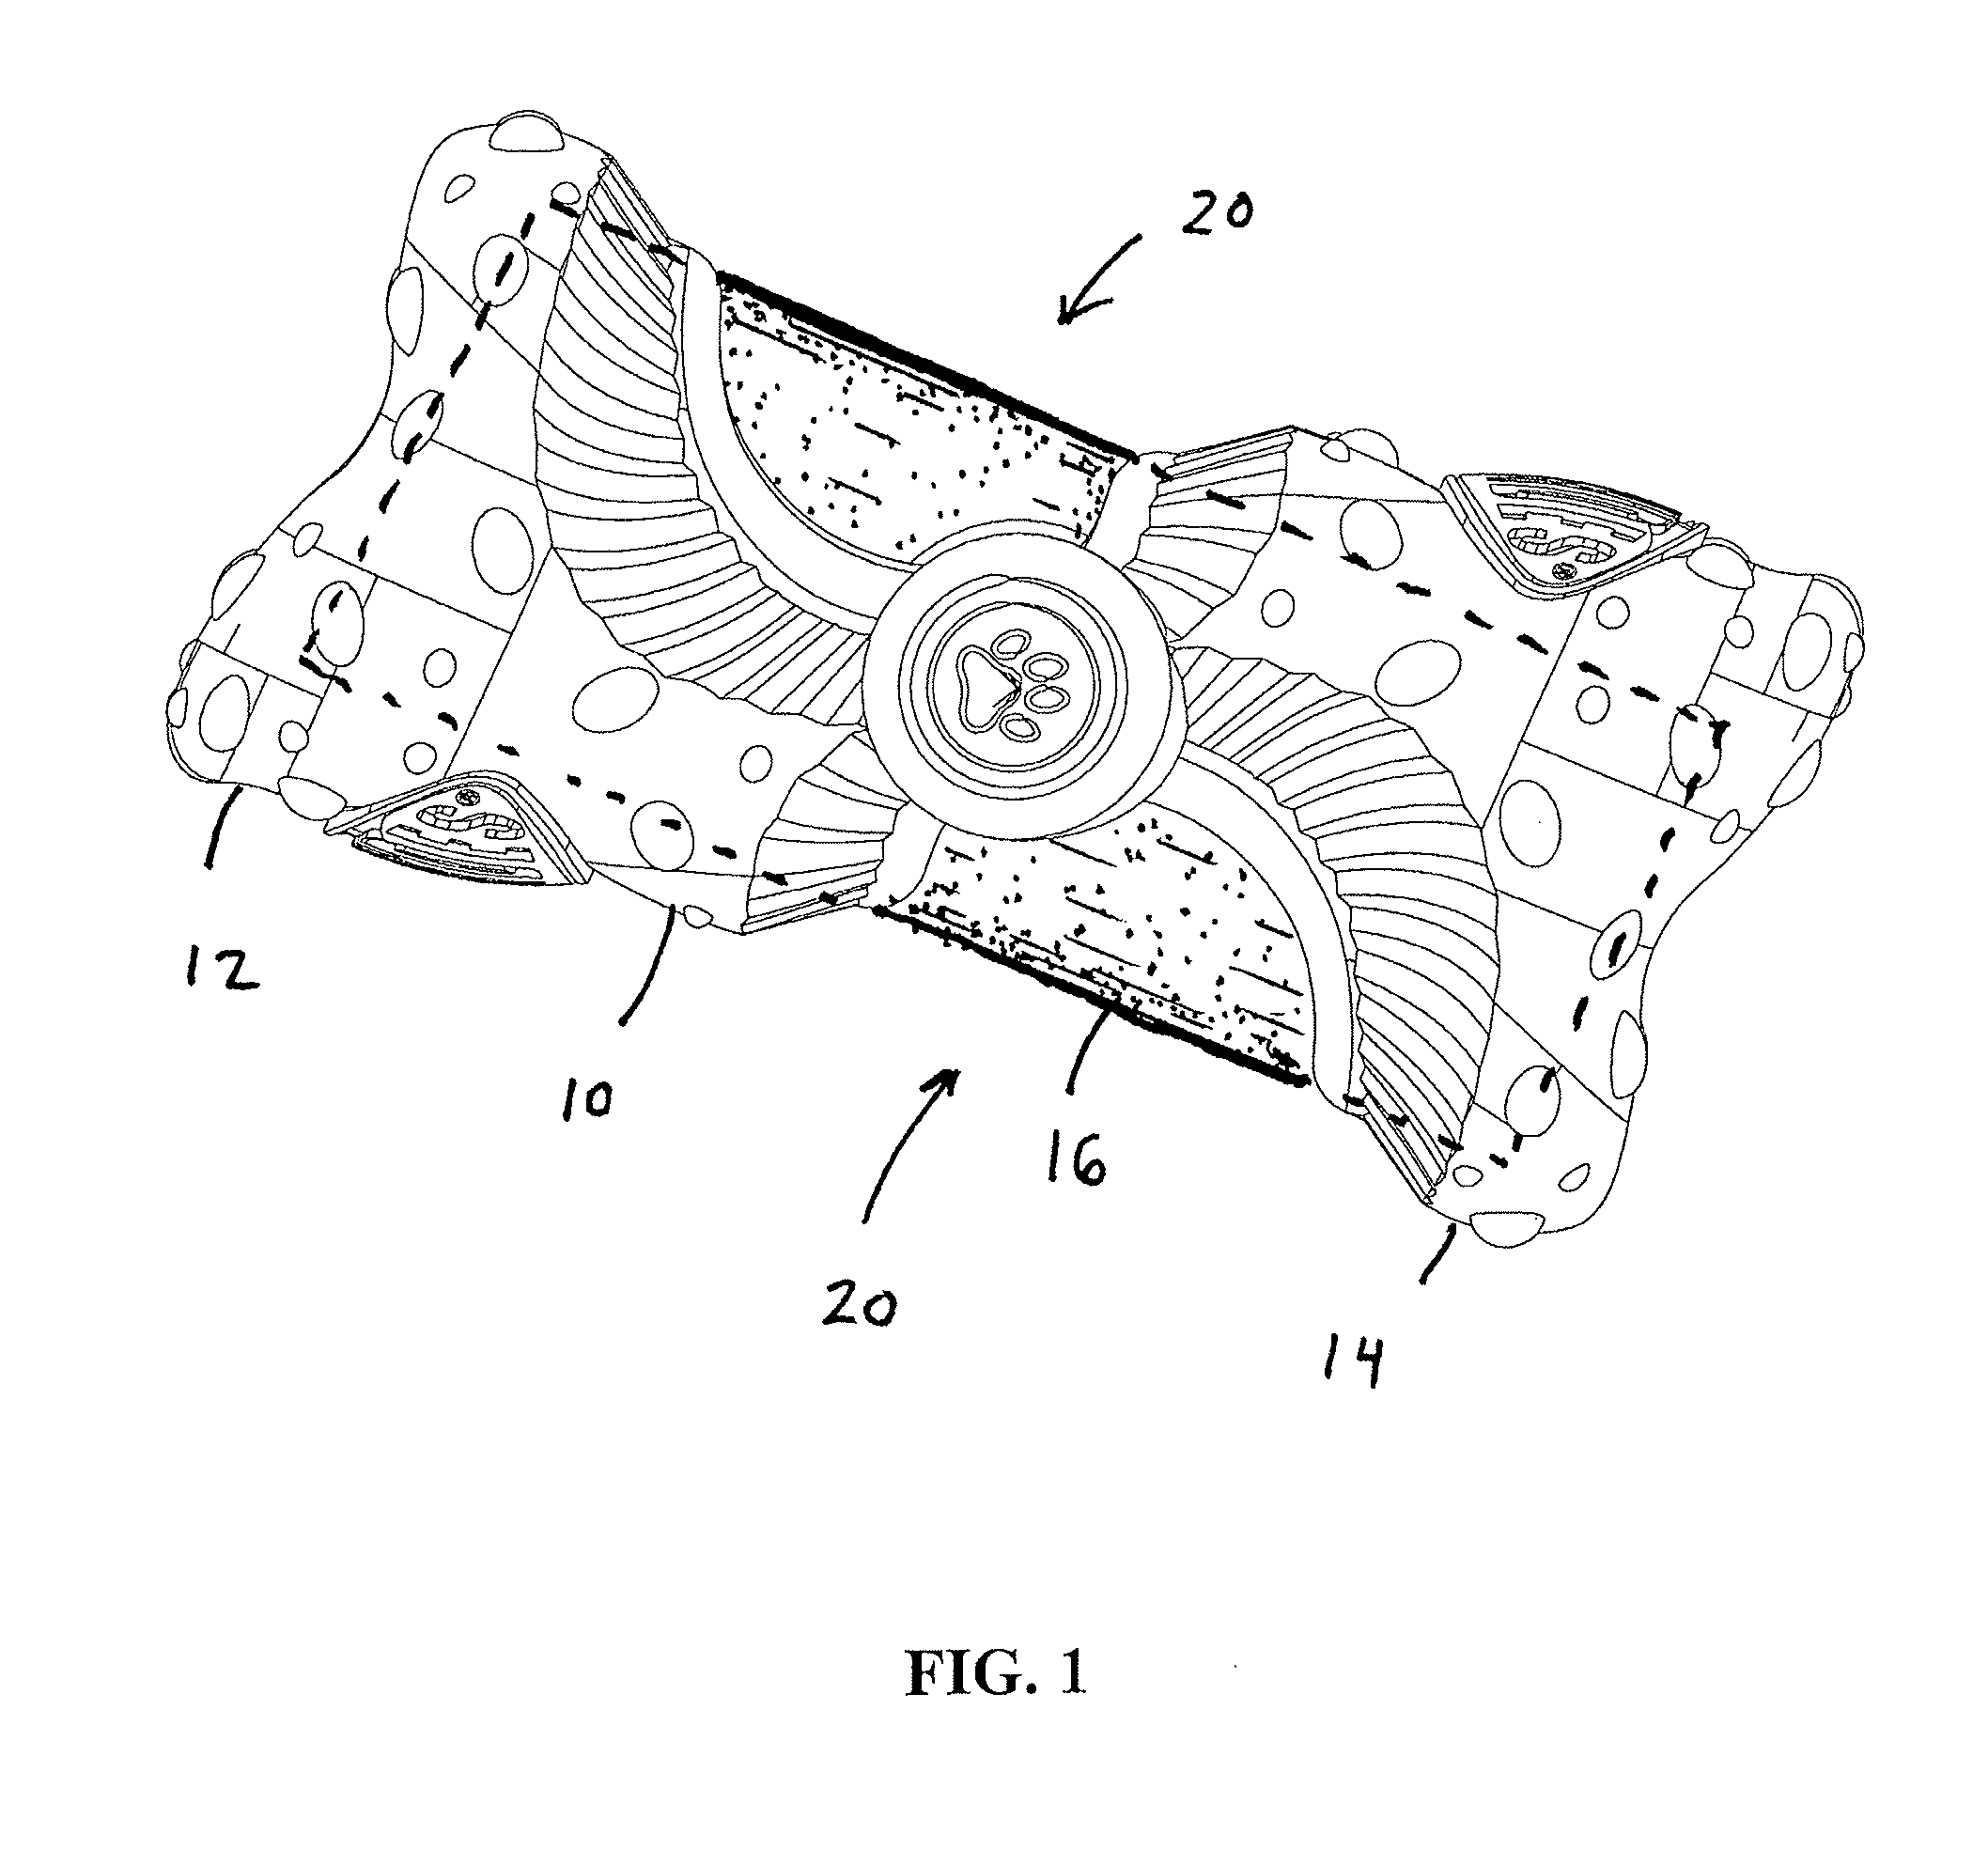 Cover and dispensing device